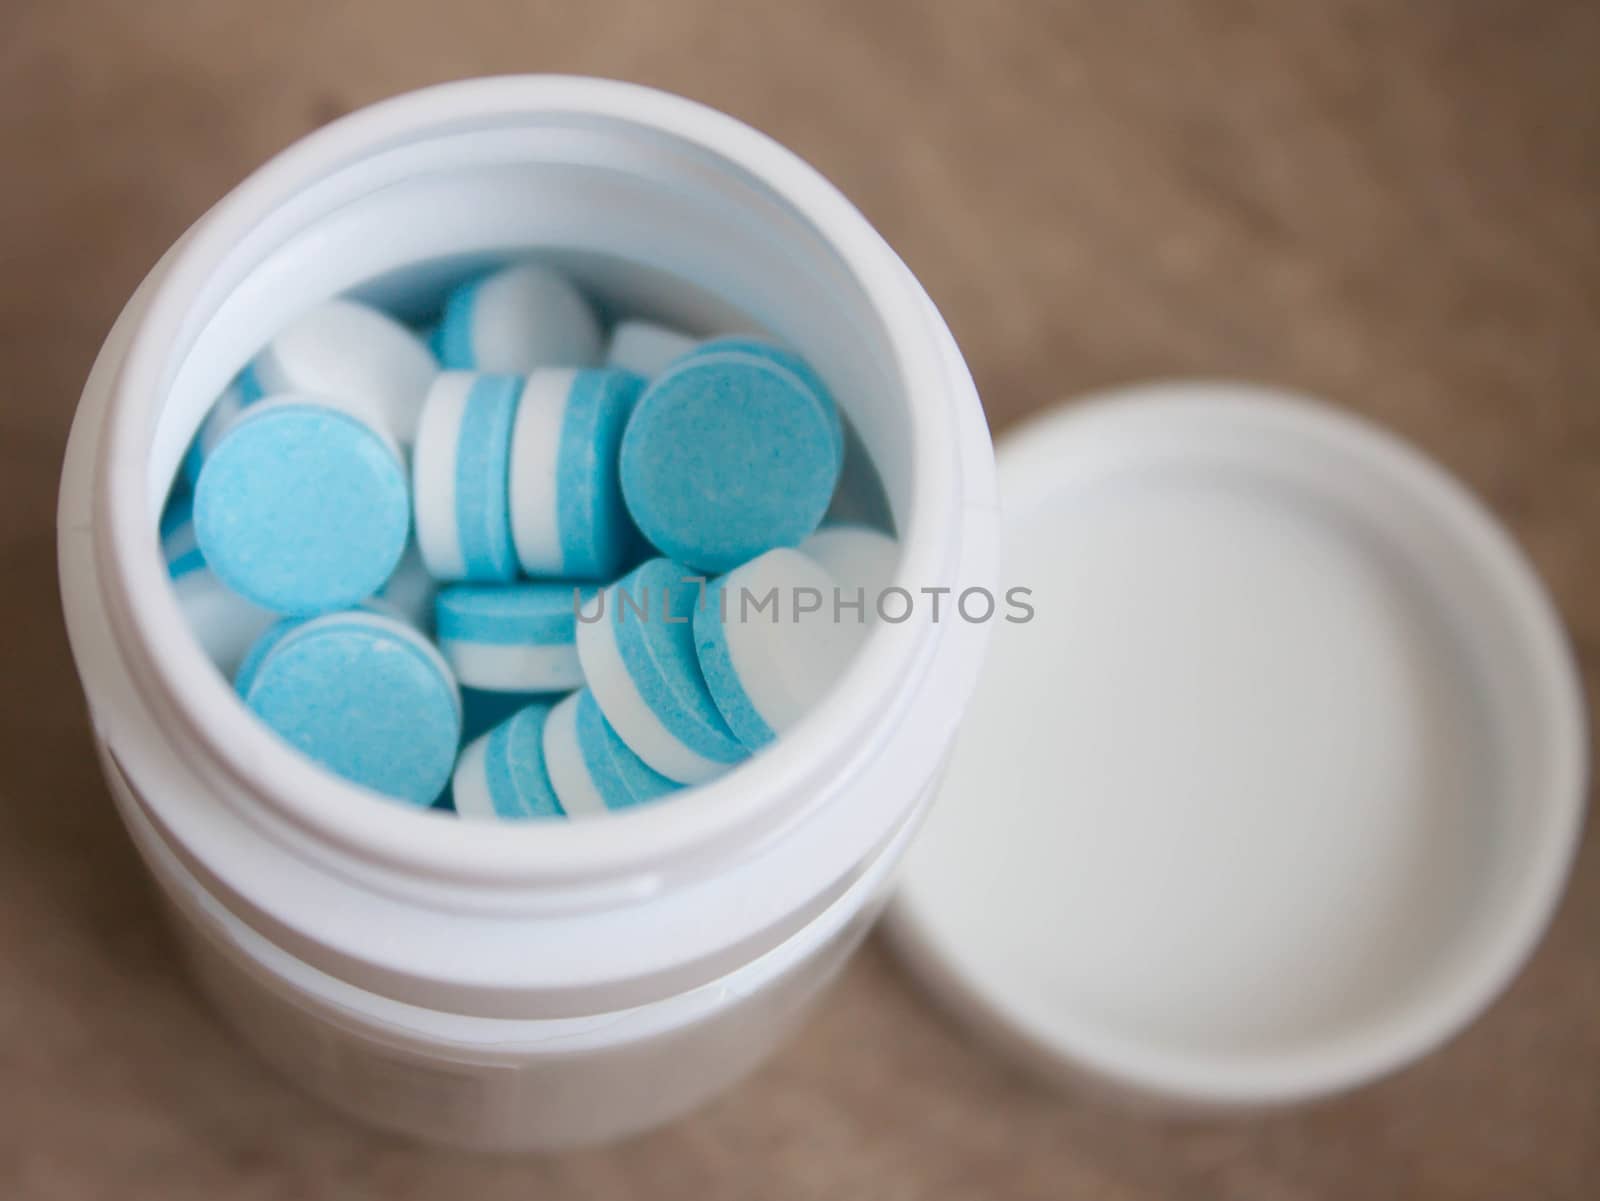 Paracetamol tablets, white and blue in the bottle cap.